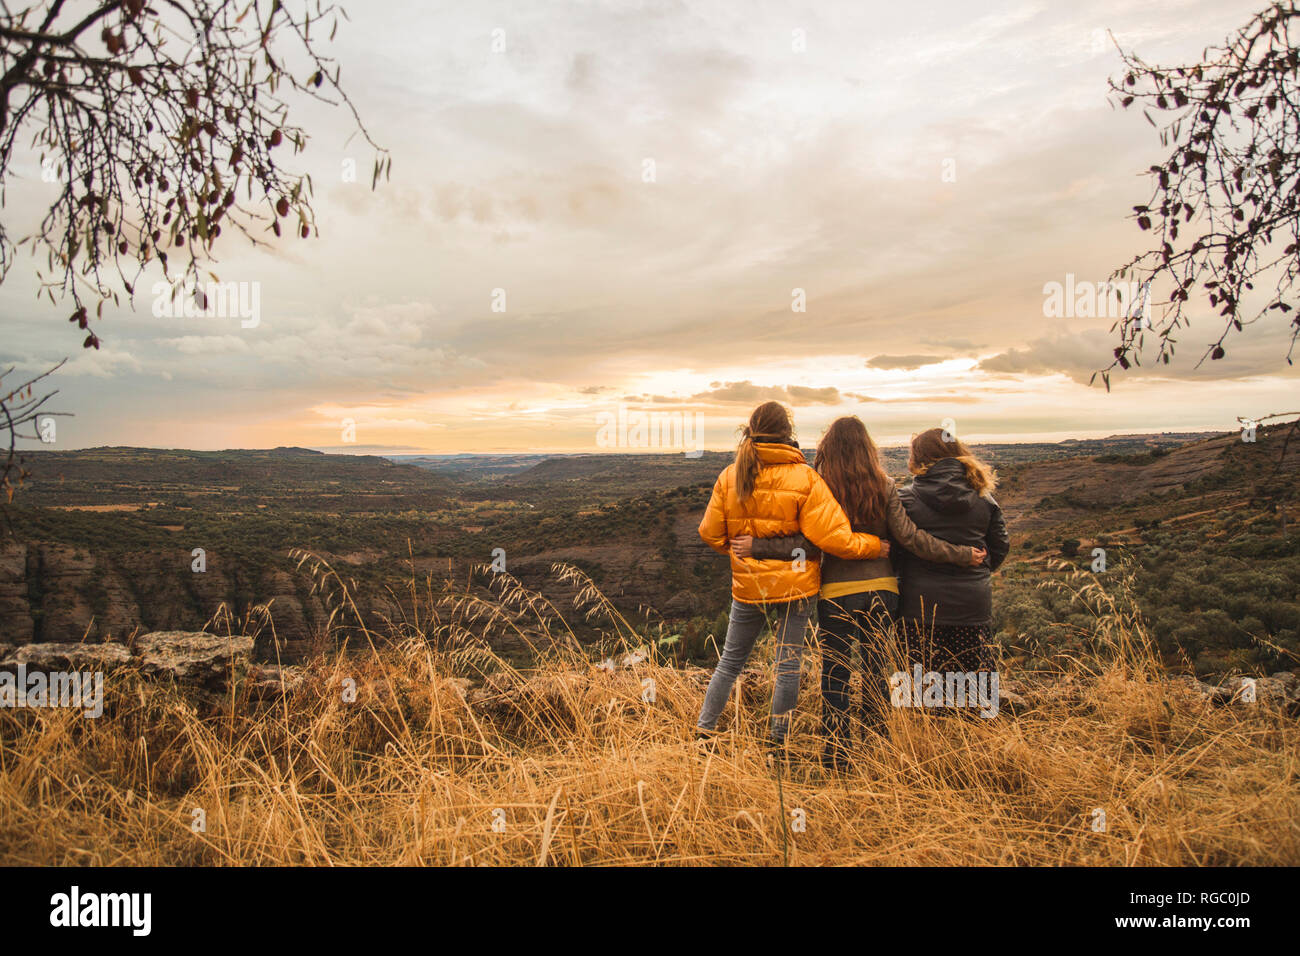 Spain, Alquezar, three friends embracing on a hill overlooking the scenery Stock Photo